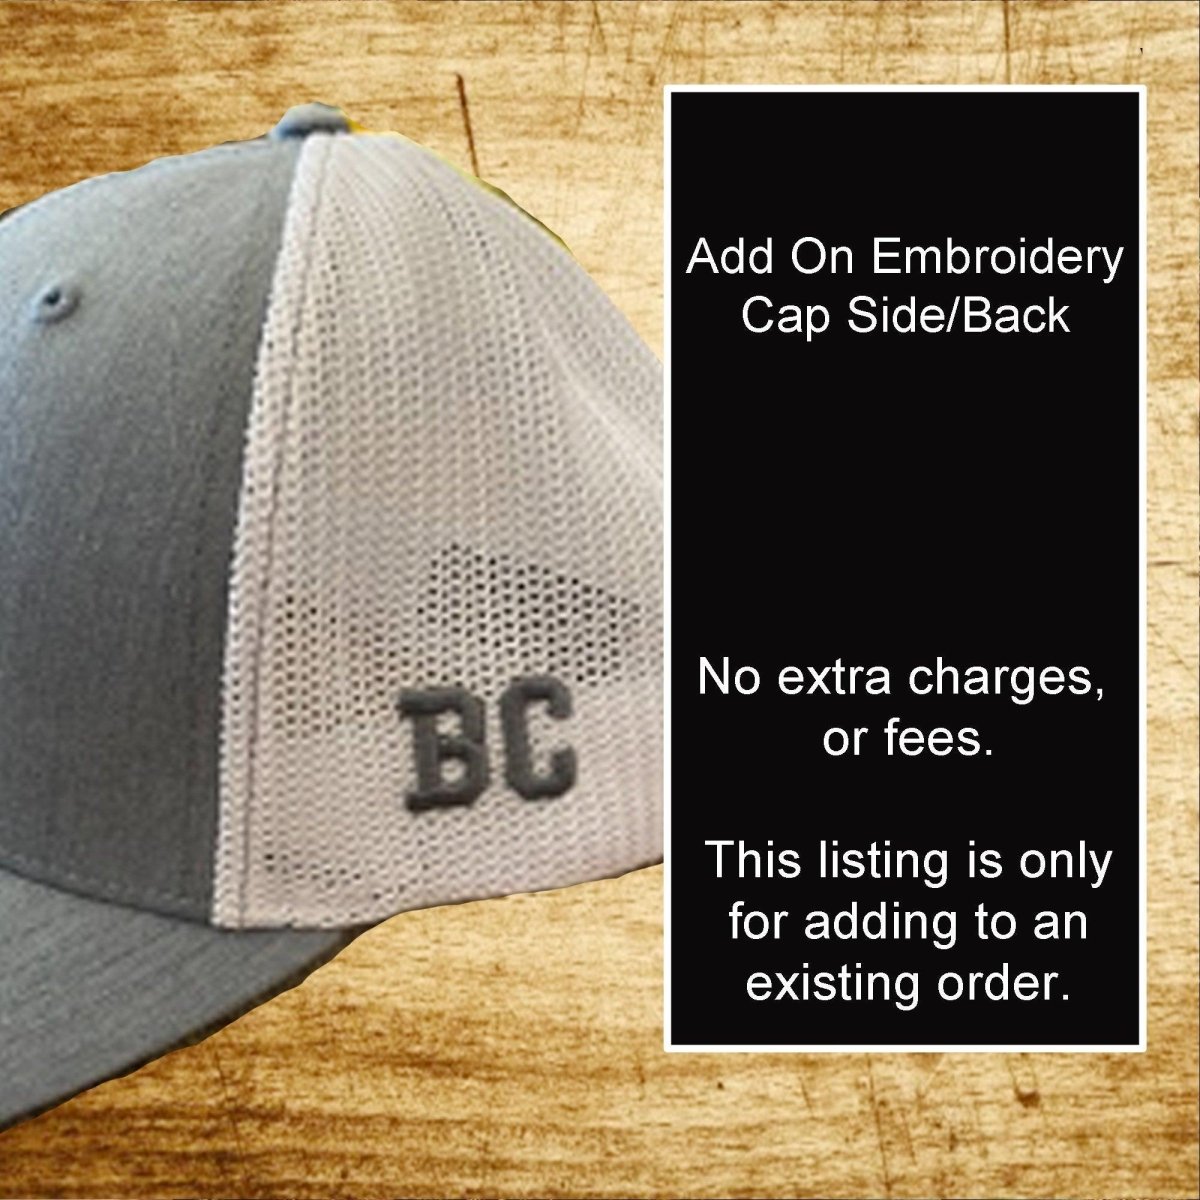 Add on Embroidery - Cap Side or Back